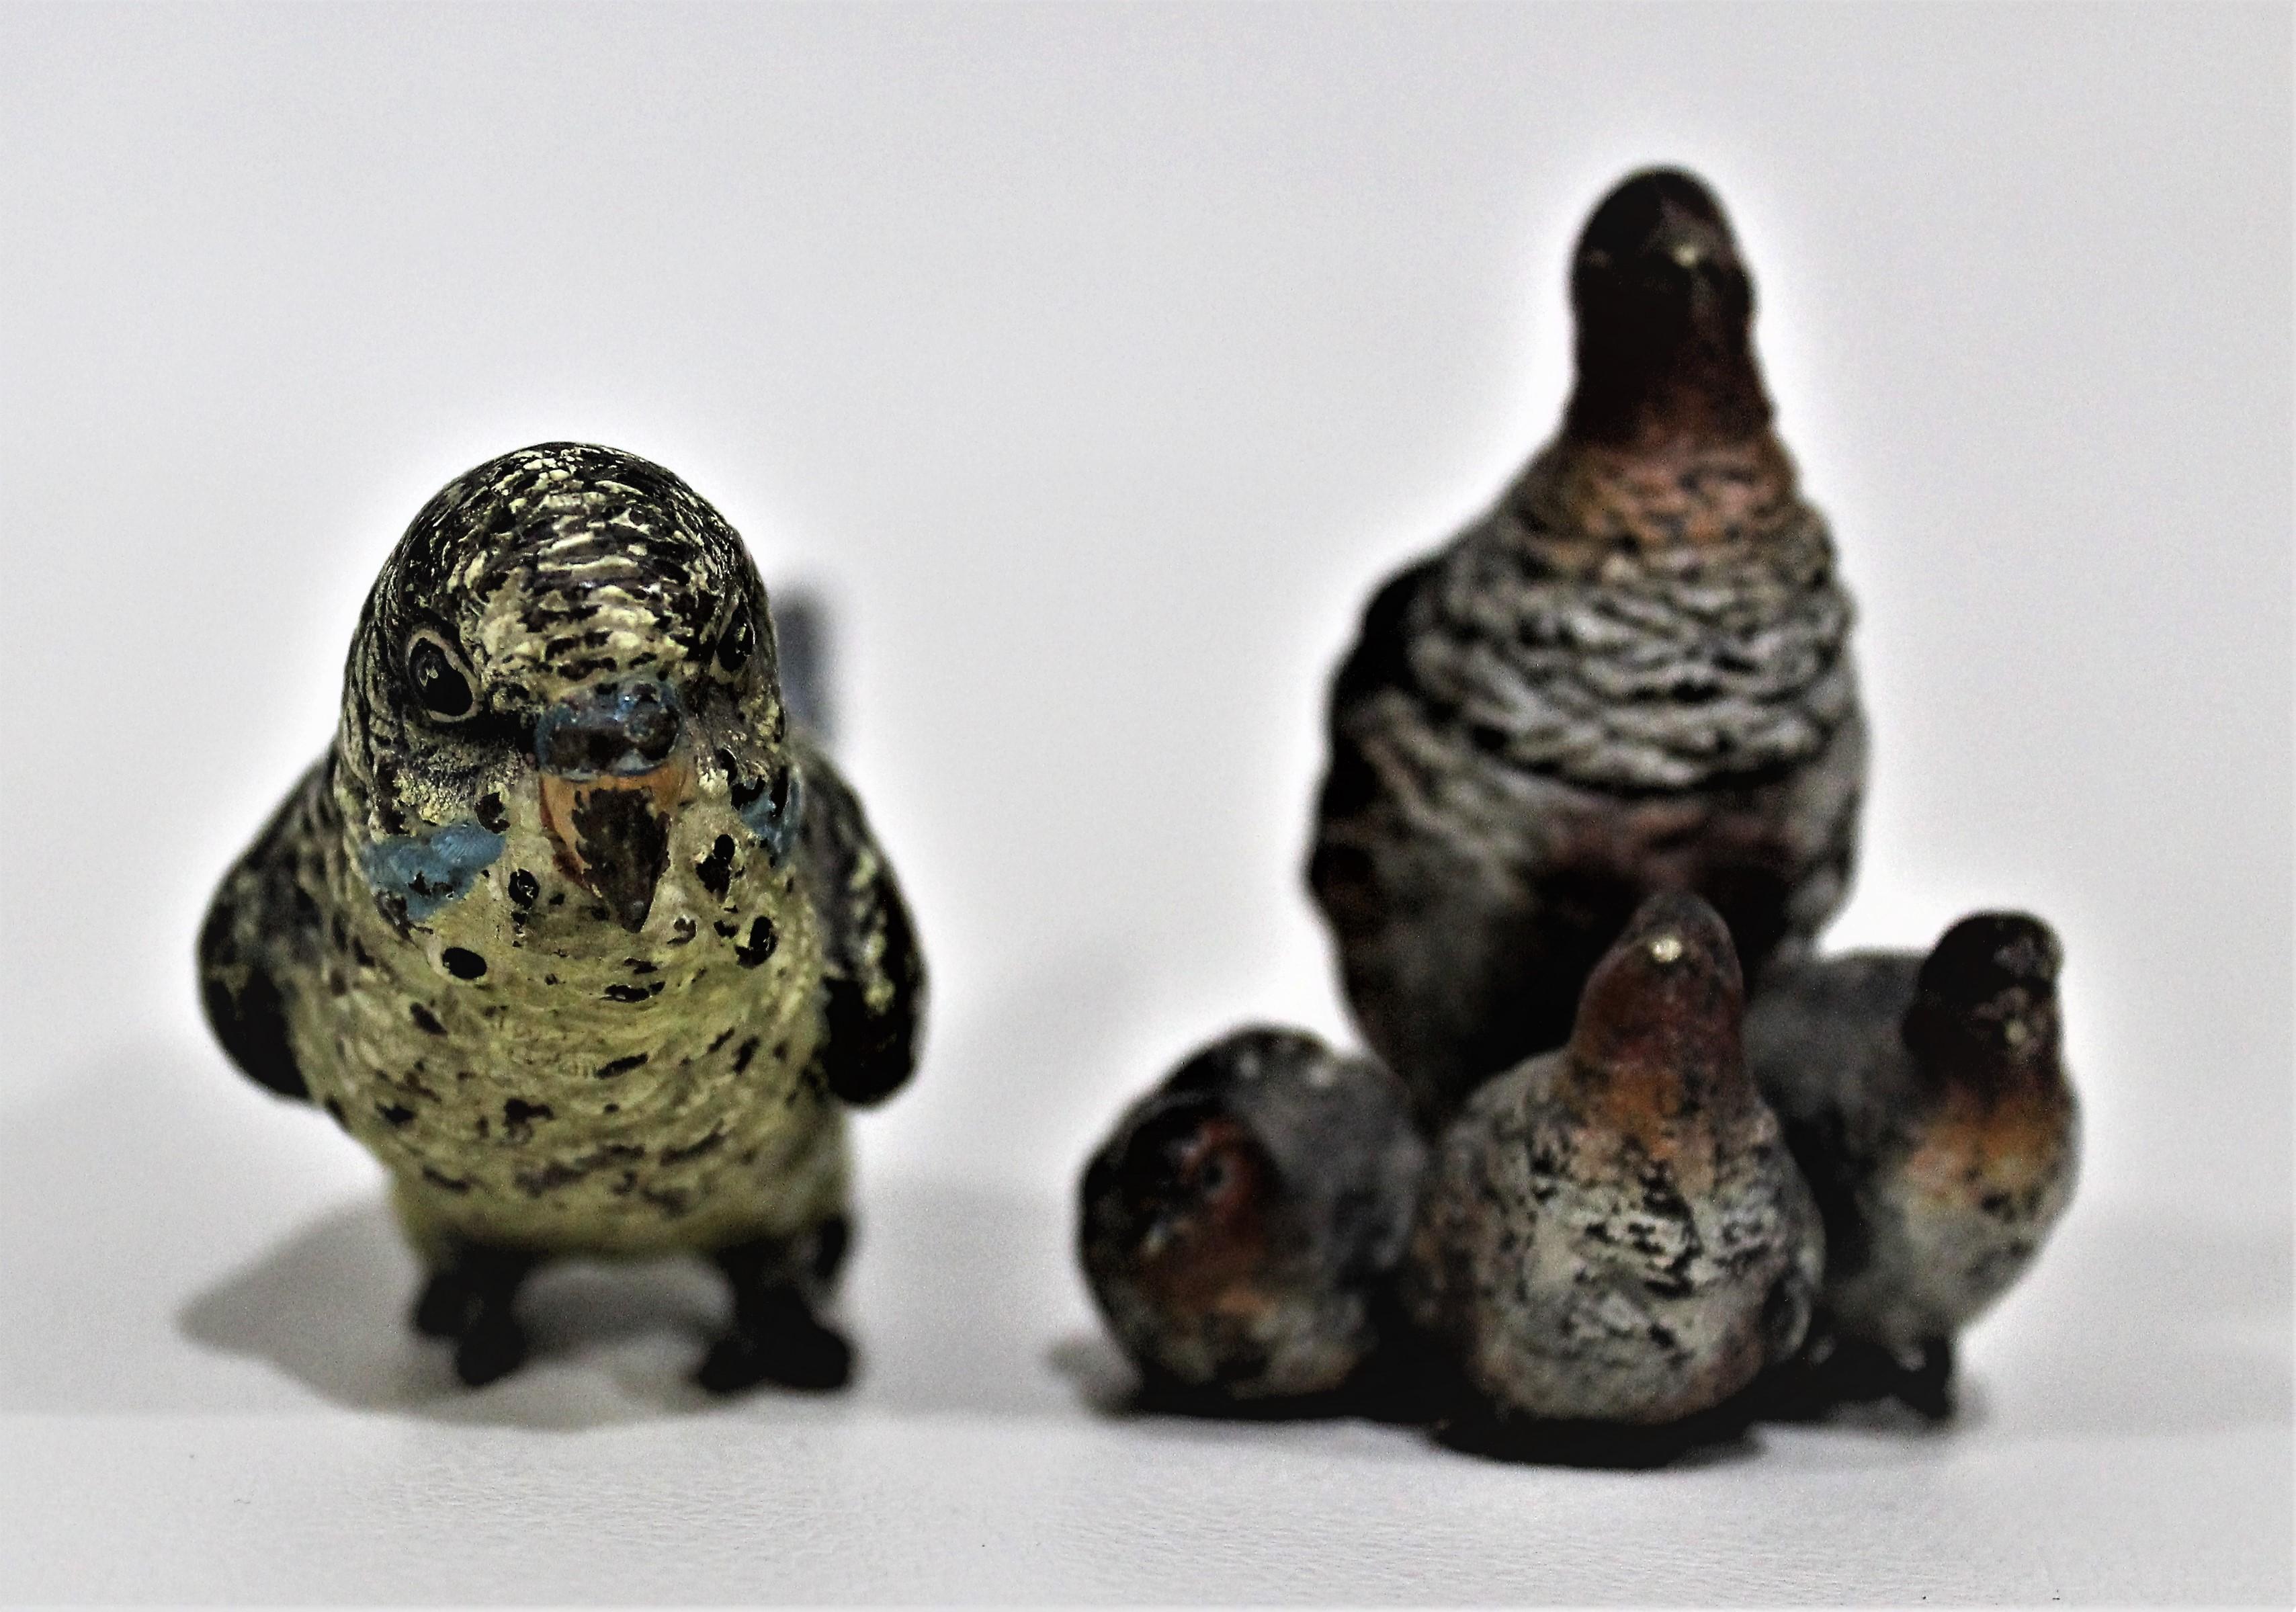 Lot of two detailed antique Austrian cast and cold painted bronze miniature bird figurines dating from approximately the 1900-1920s time period. The cast figurines show intricate detail, for example, individual feathers, and are cold painted in a